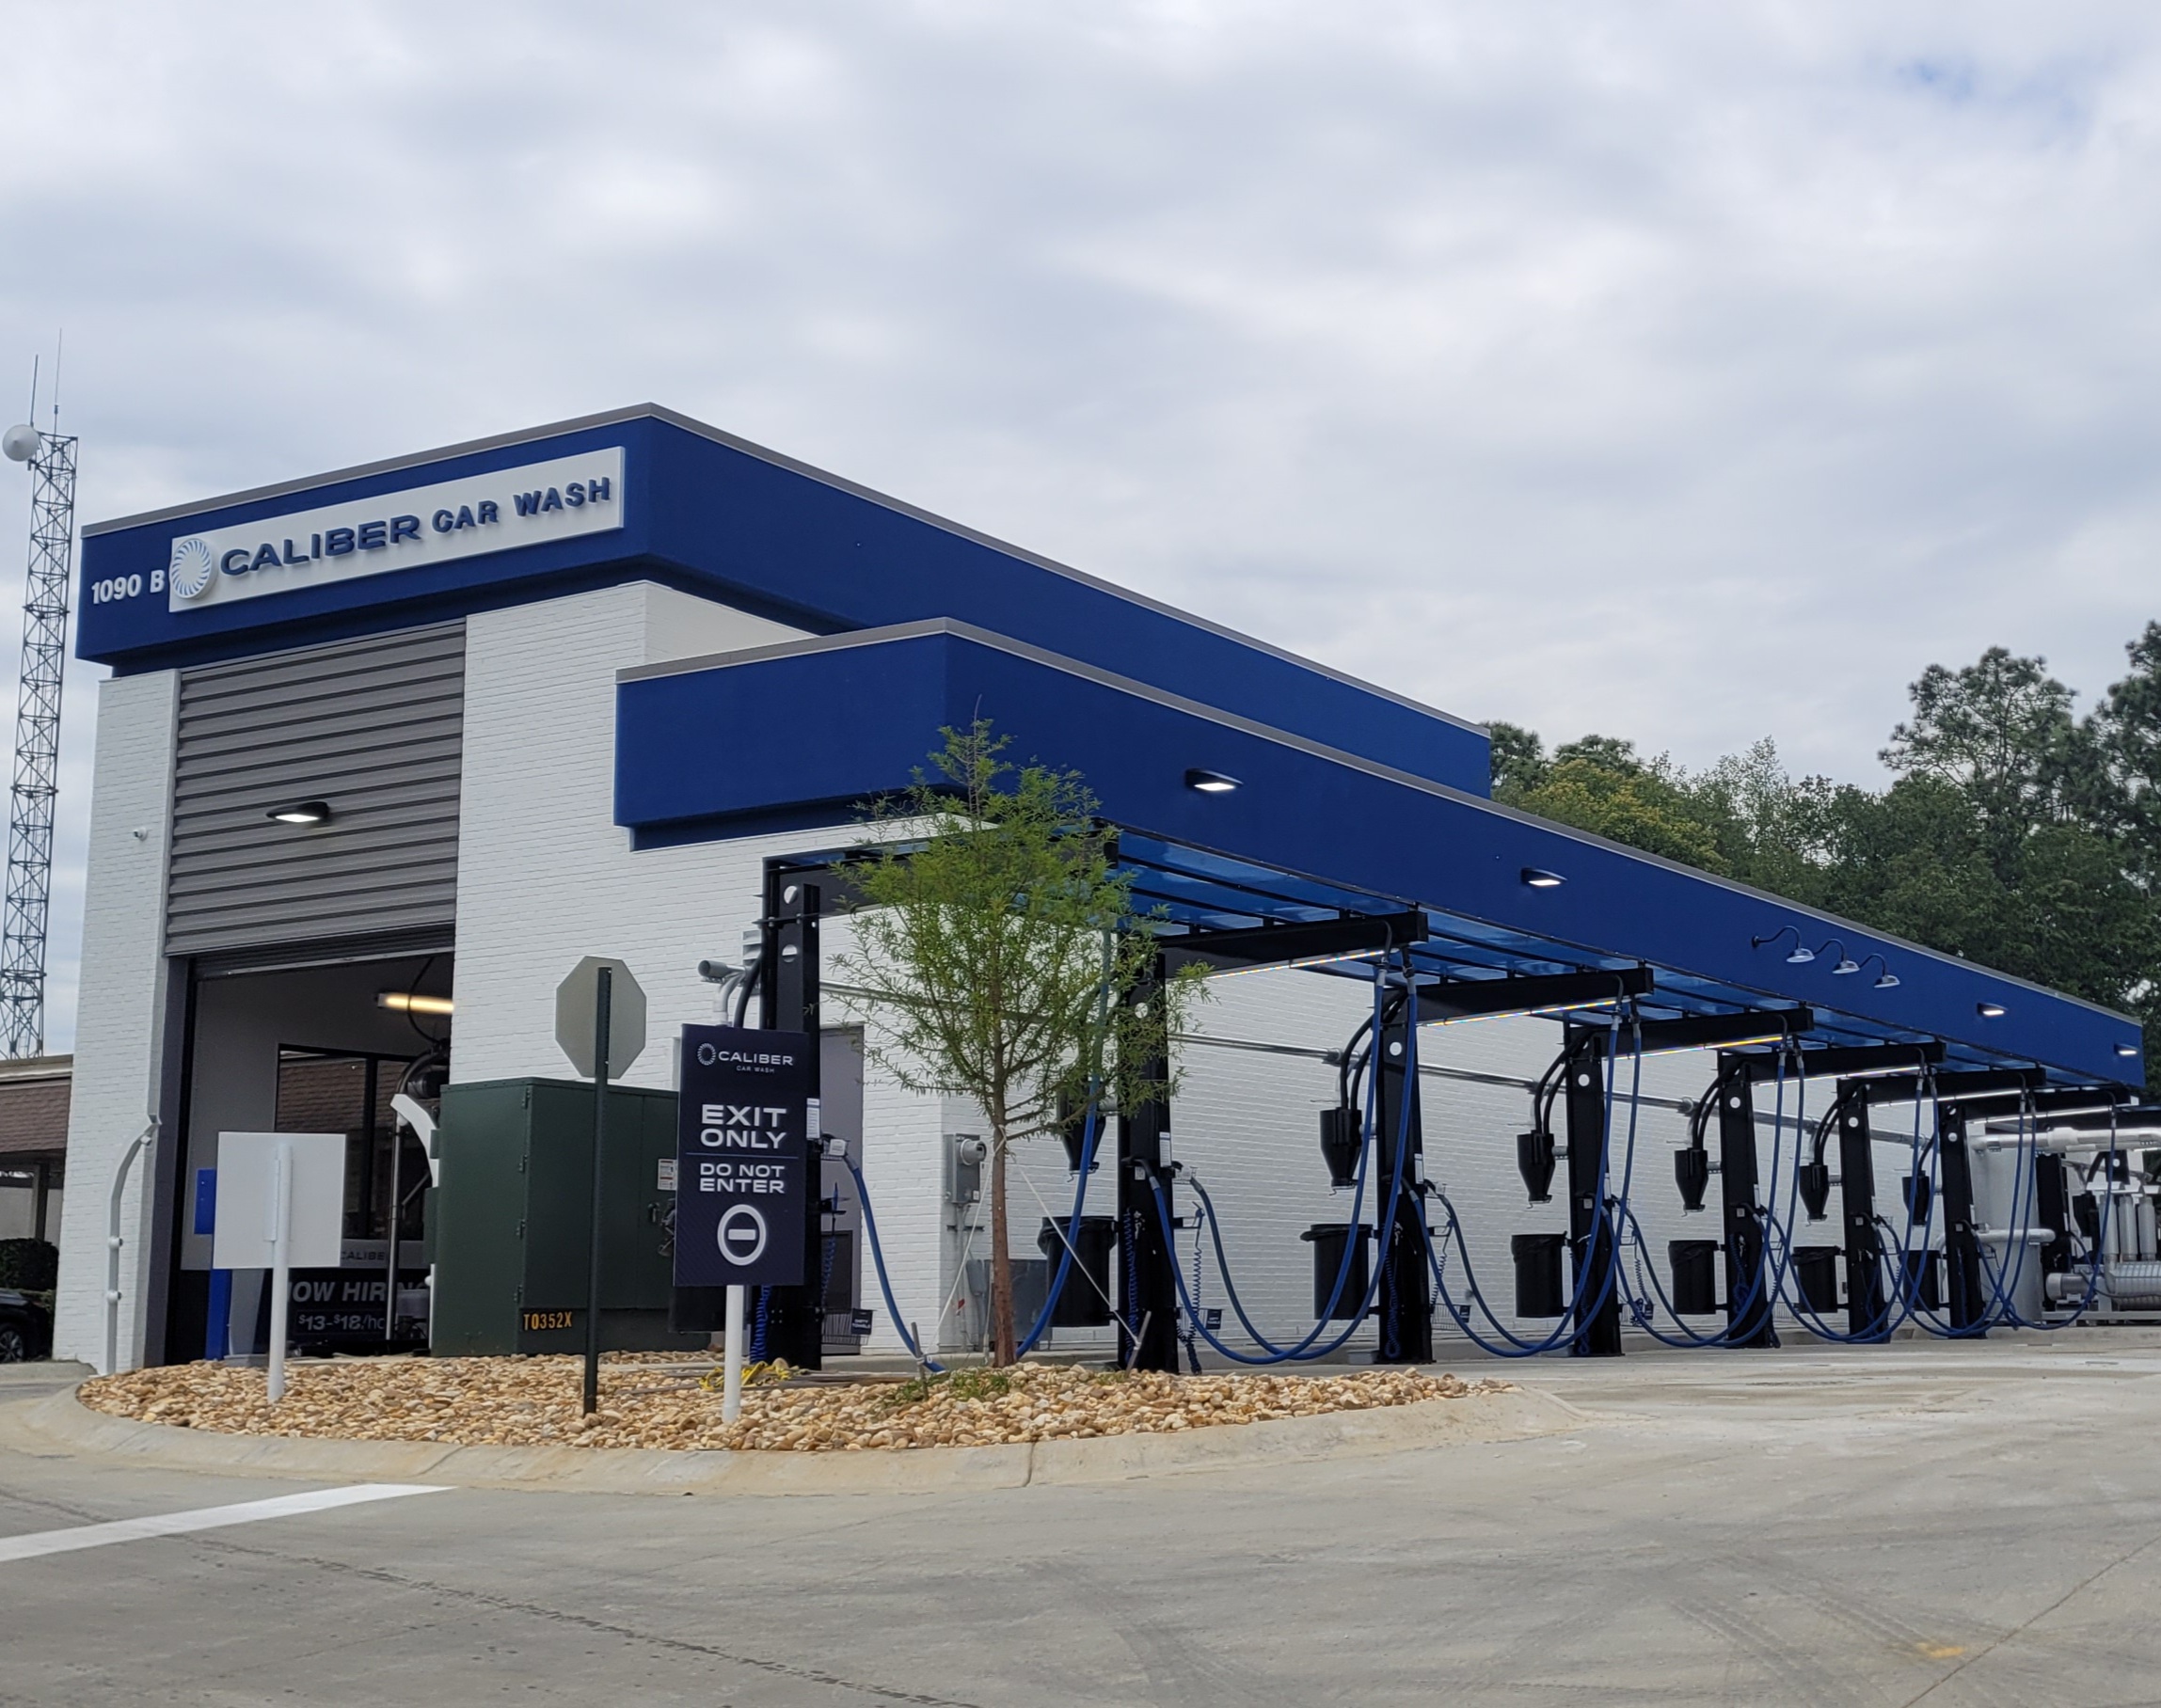 Caliber Car Wash Expands in Alabama: Introducing a New Location in Saraland